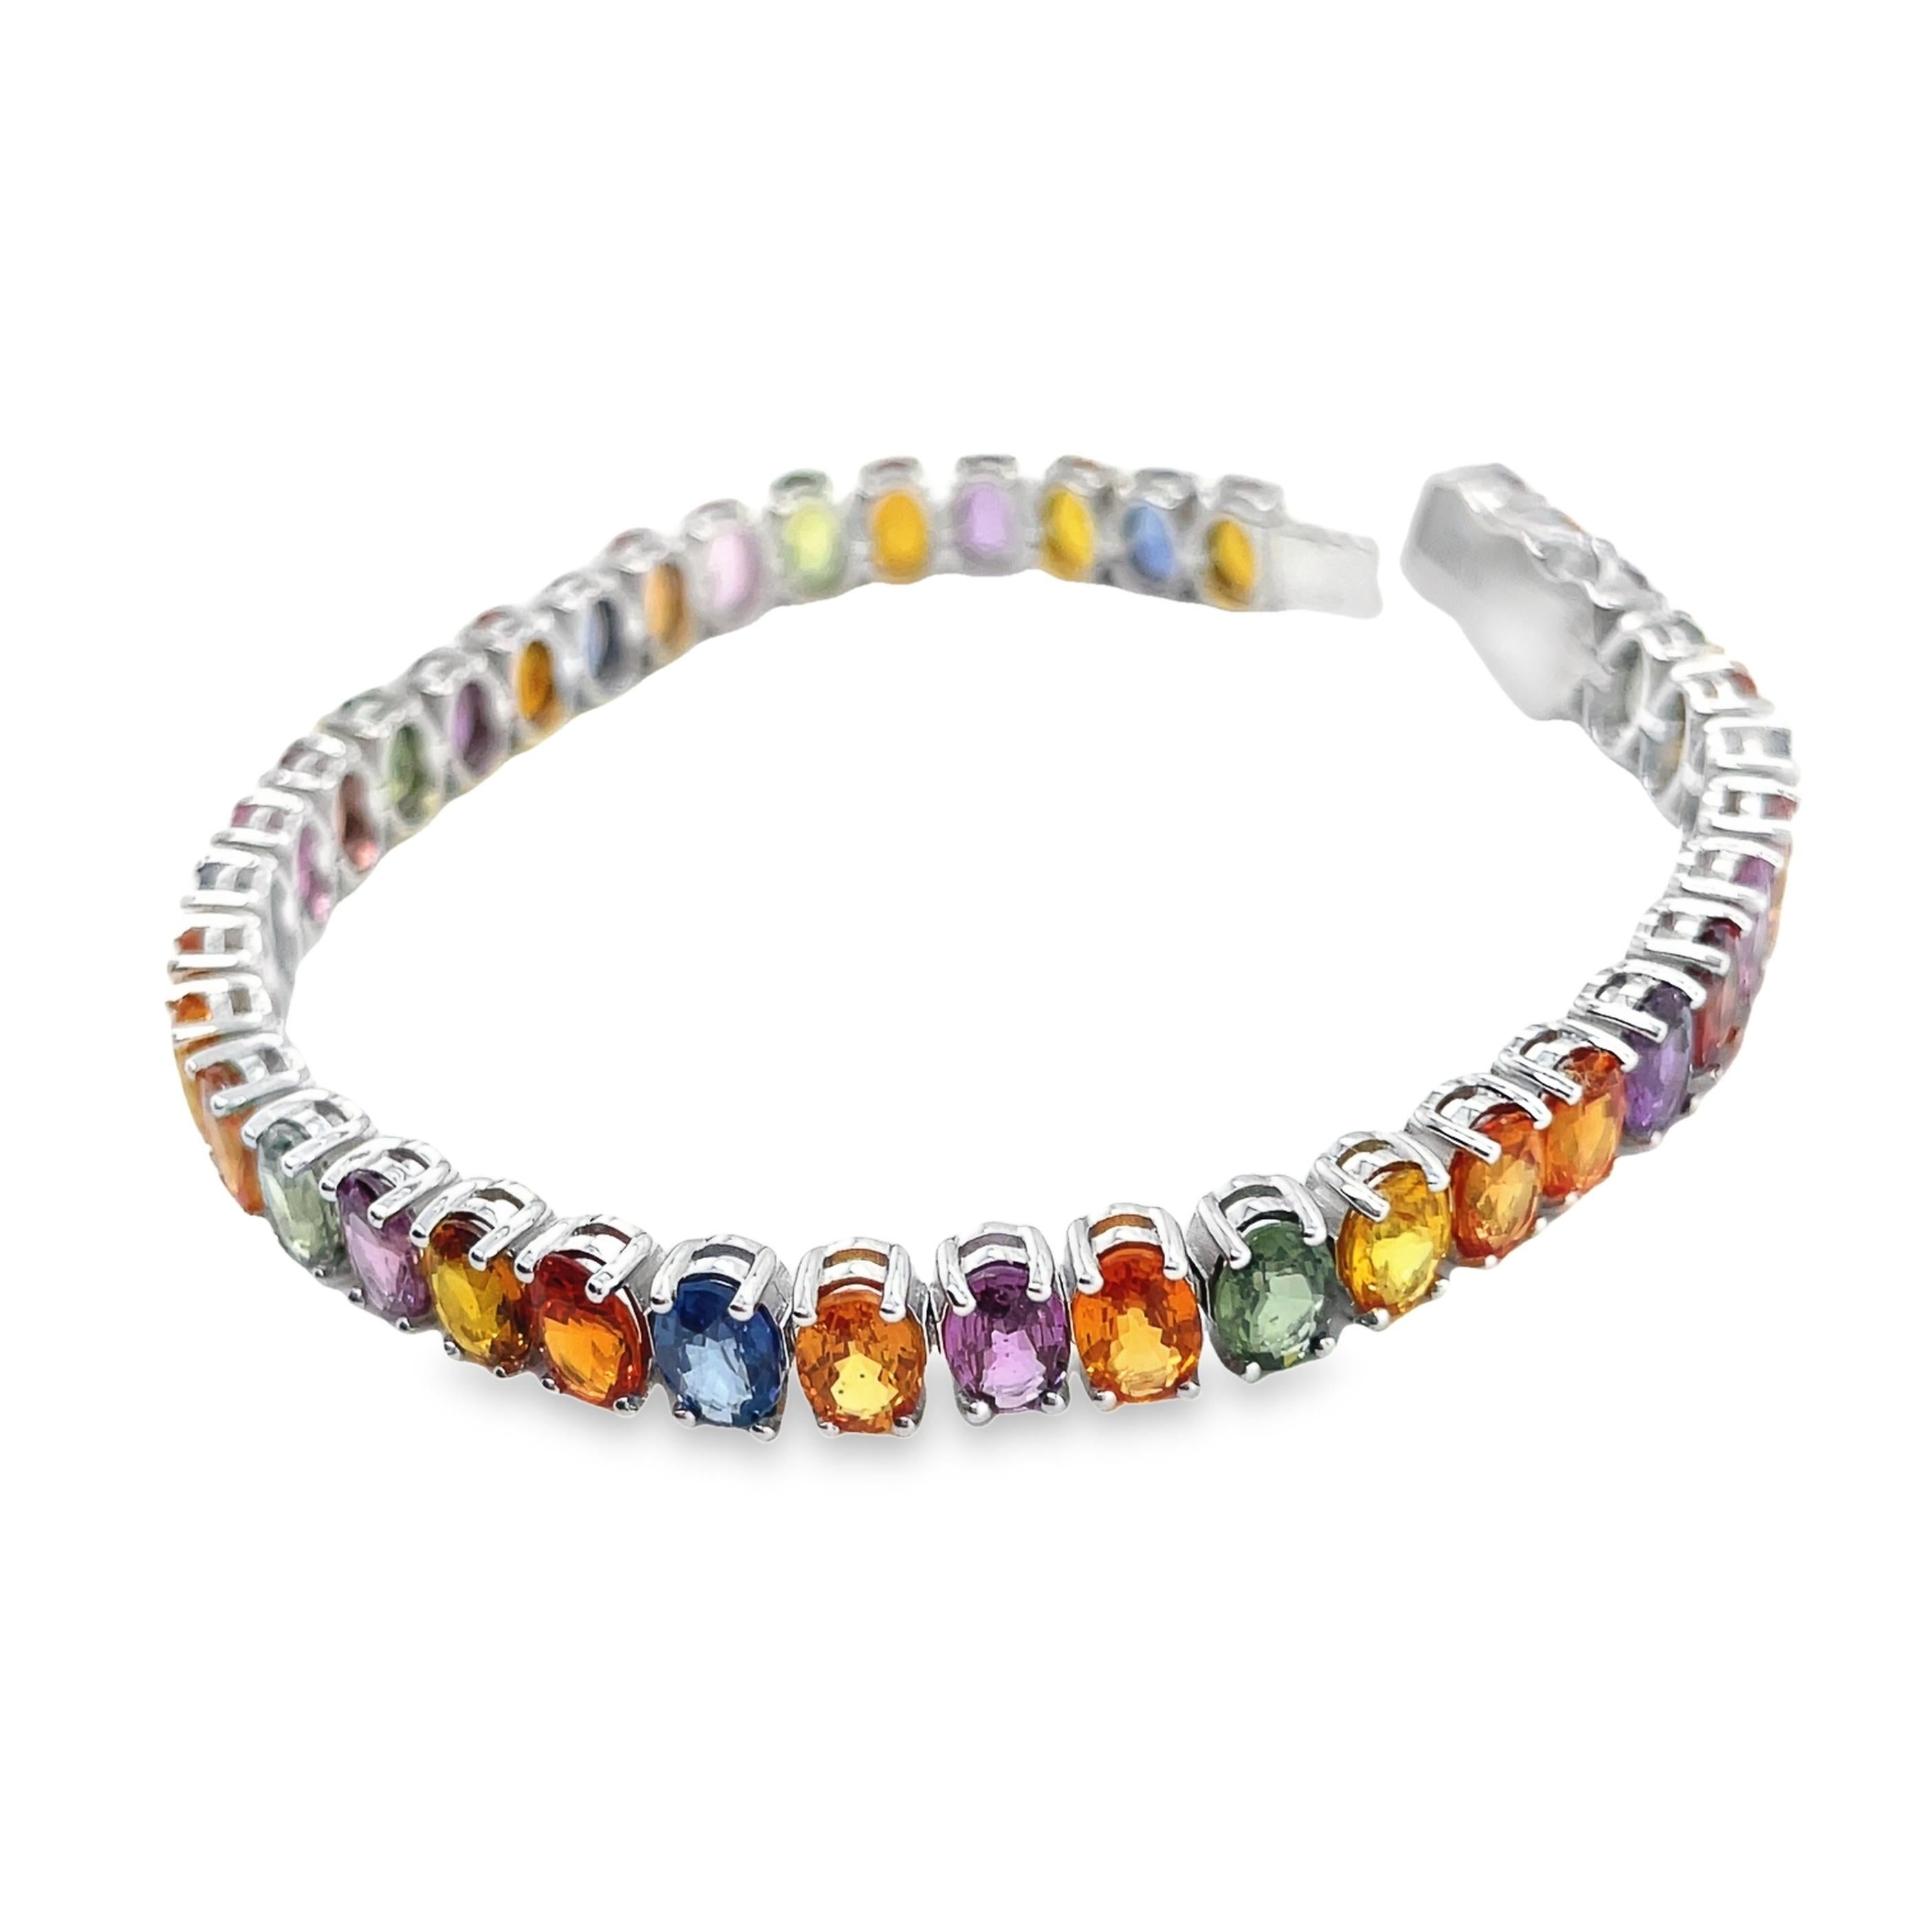 Adorn your wrist with the vibrant elegance of our IGI Certified 14K white gold bracelet, featuring 22.16 carats of natural multi-color sapphires. This exquisite piece is comprised of 40 oval mixed-cut sapphires, carefully selected for their luminous